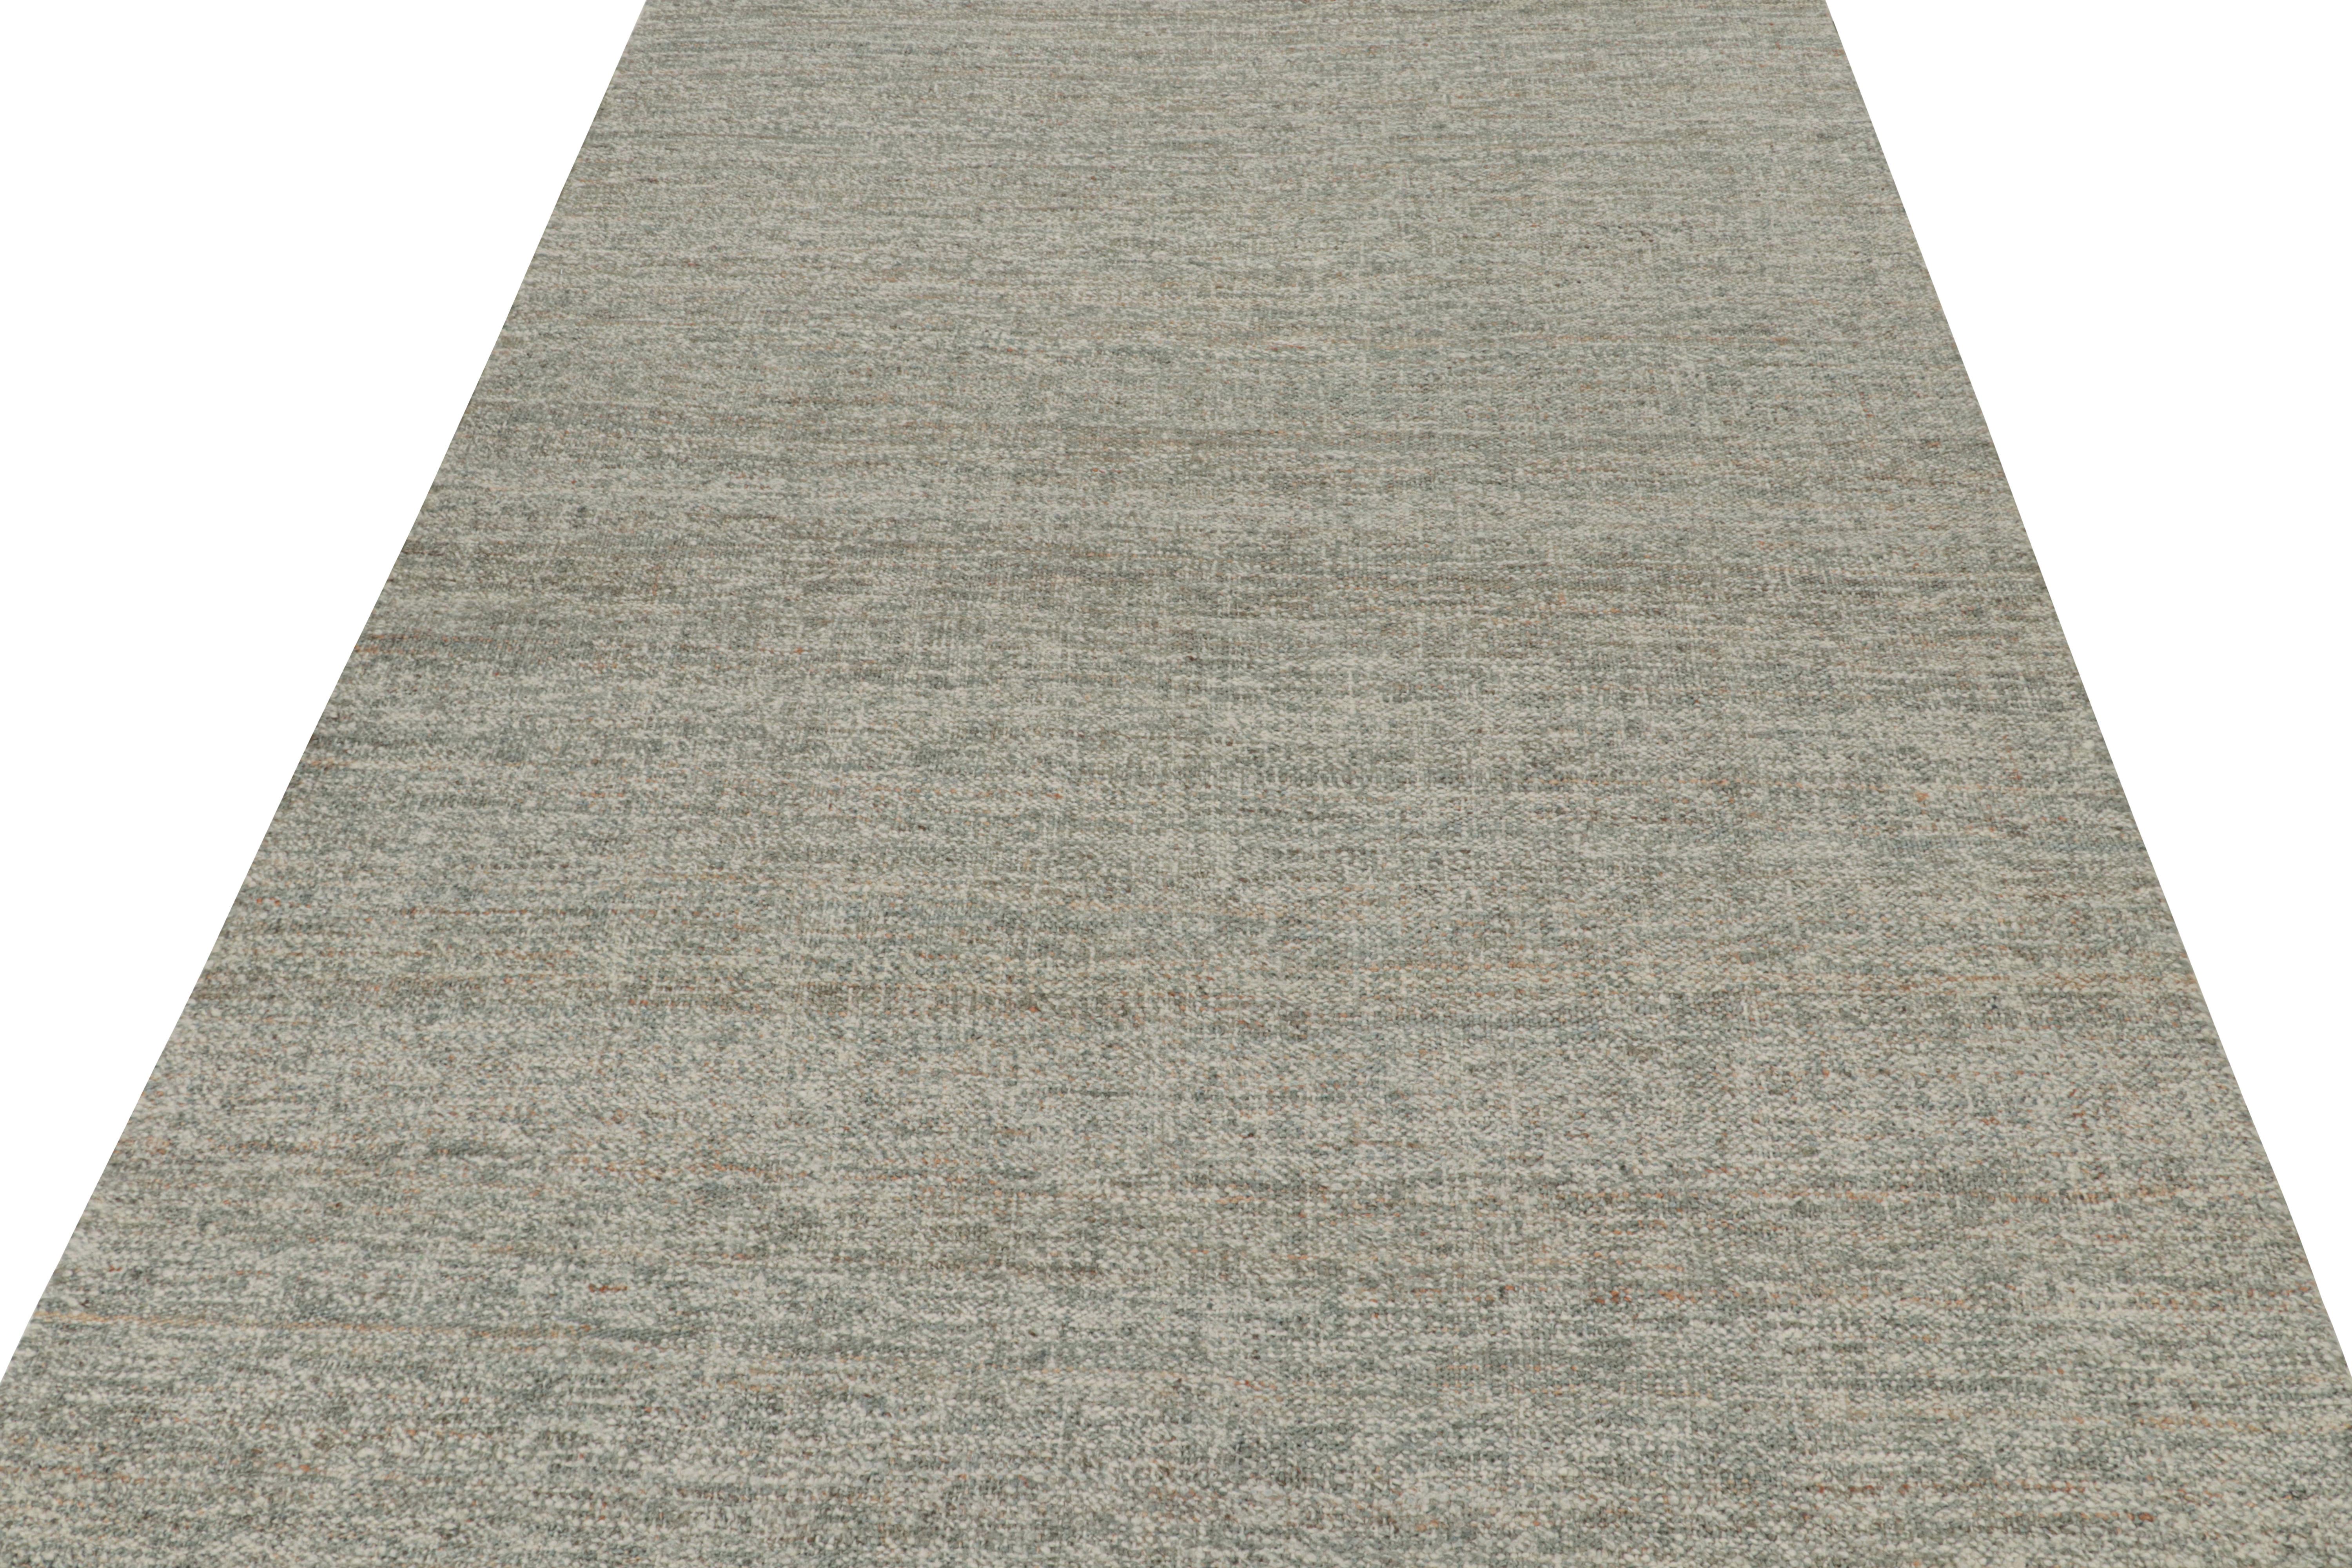 Rug & Kilim’s Modern Kilim Rug in Gray & White In New Condition For Sale In Long Island City, NY